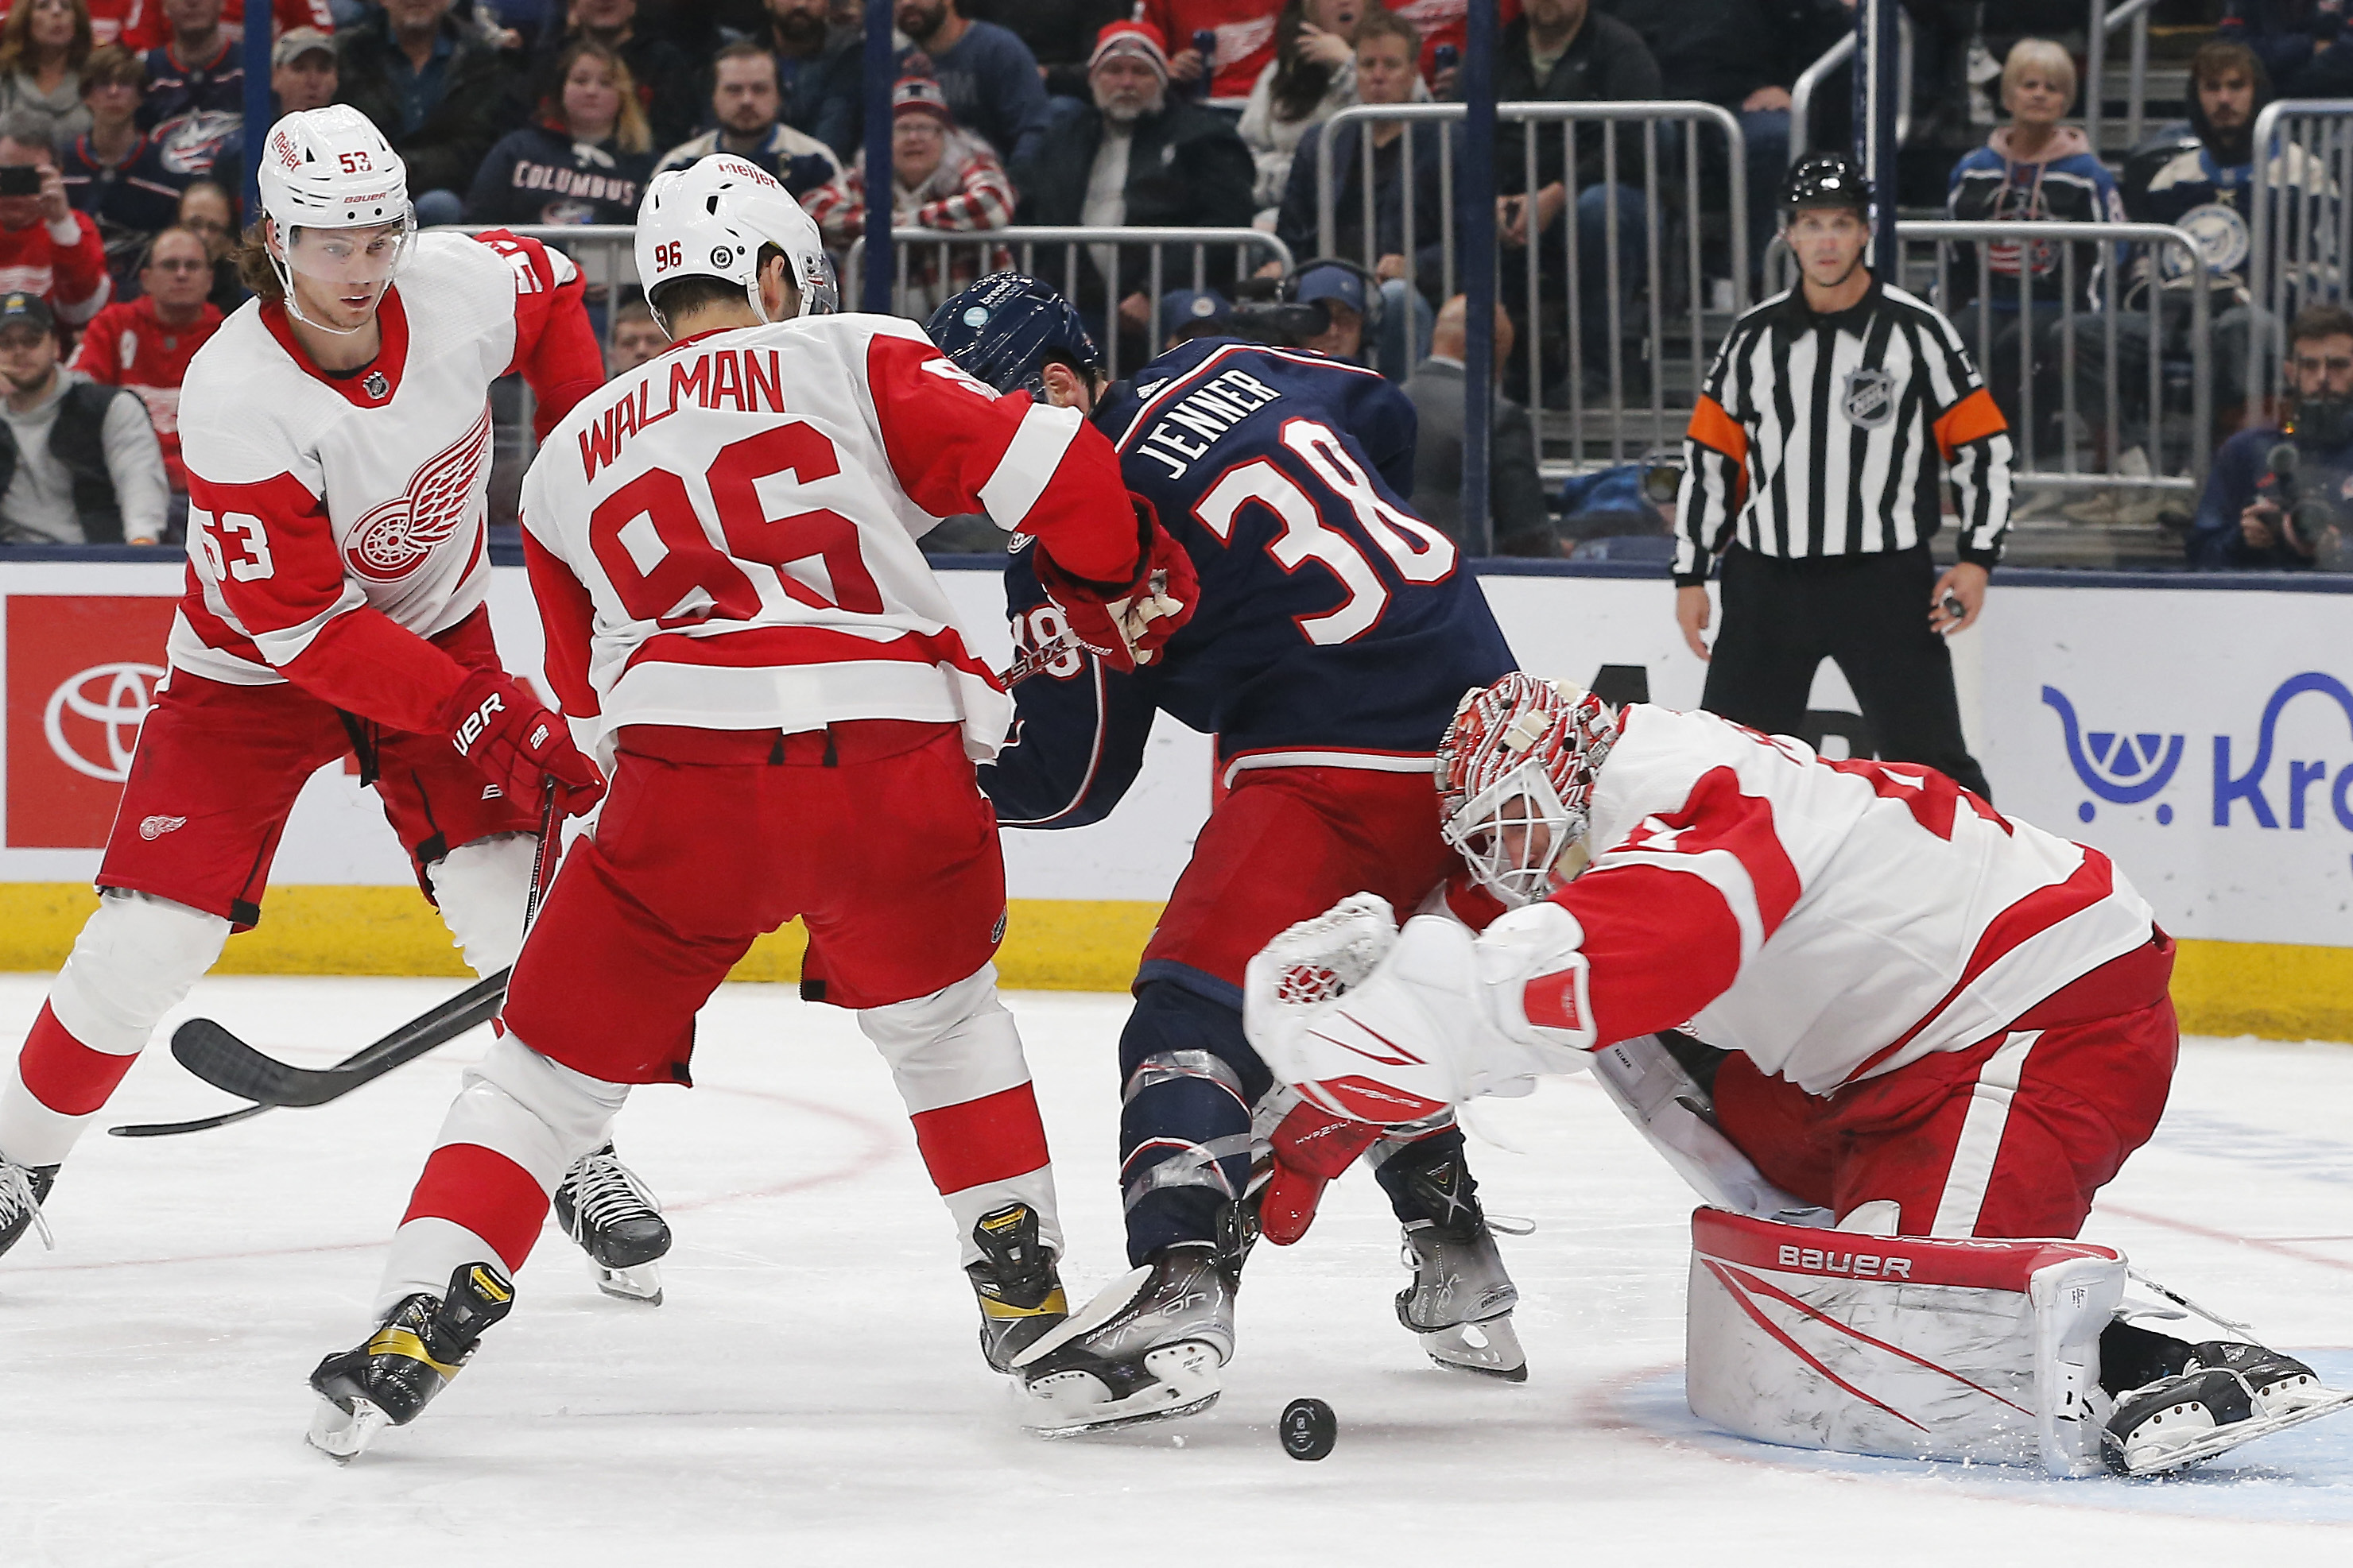 James Reimer, four goal-scorers carry Red Wings past Blue Jackets | Reuters